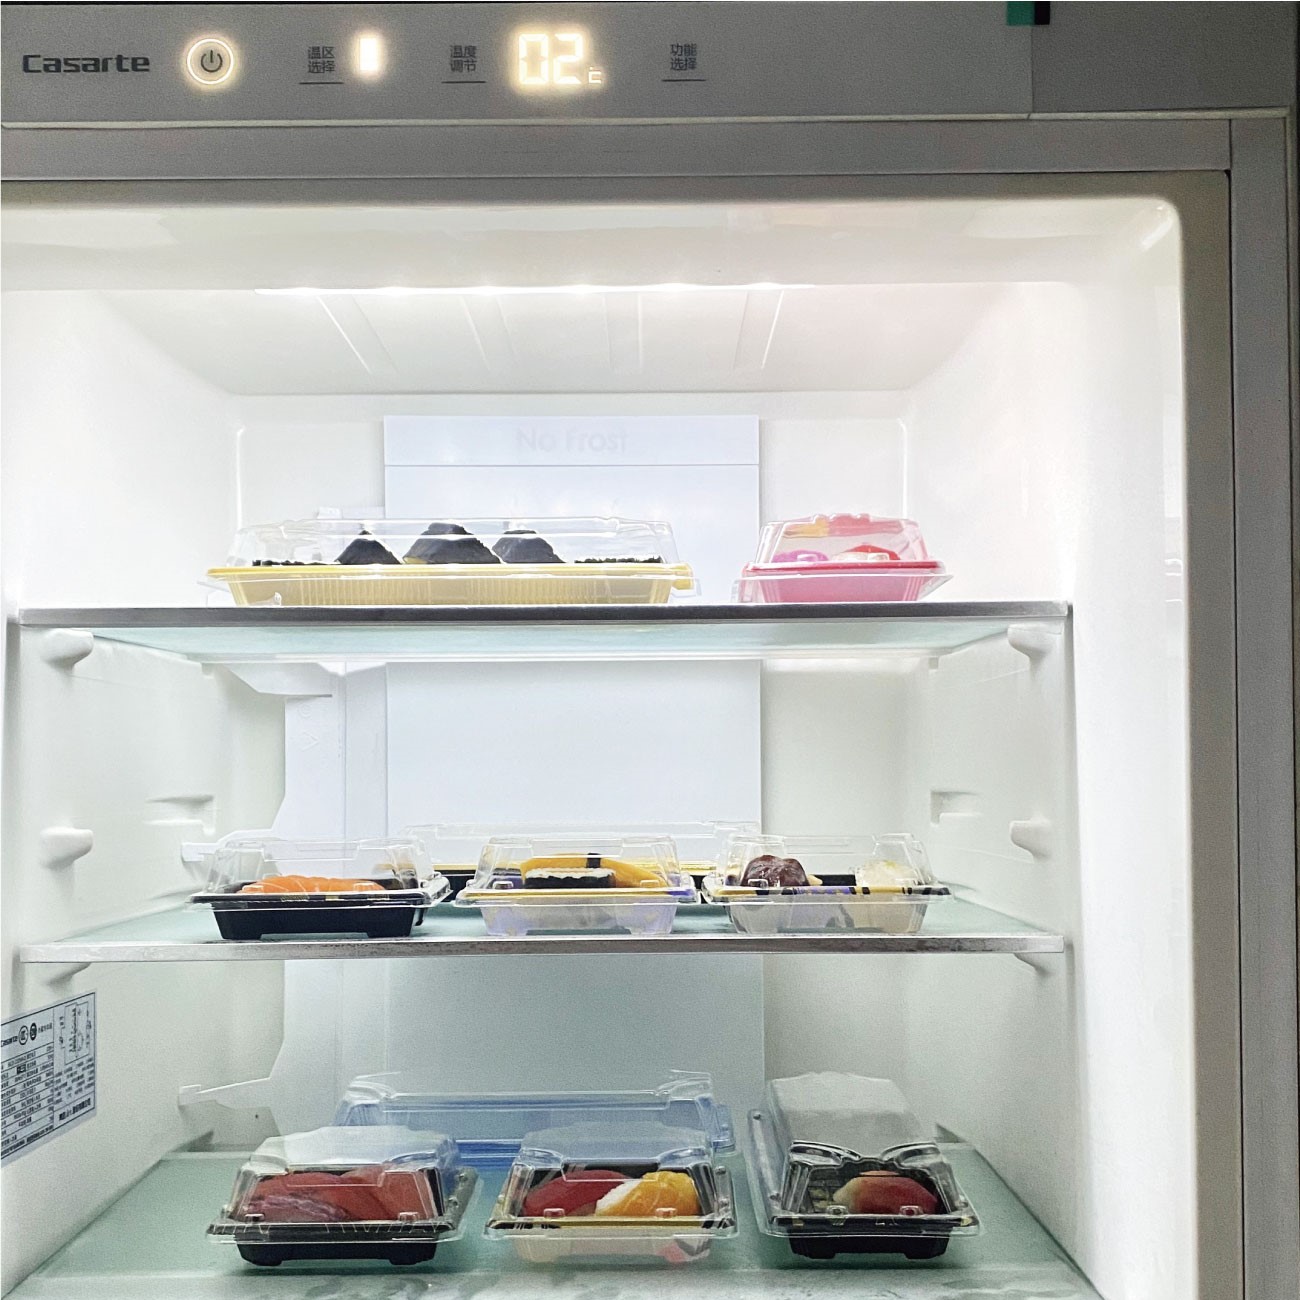 There are some sushi plates WL-03 in the refrigerator, which can be used for refrigeration.